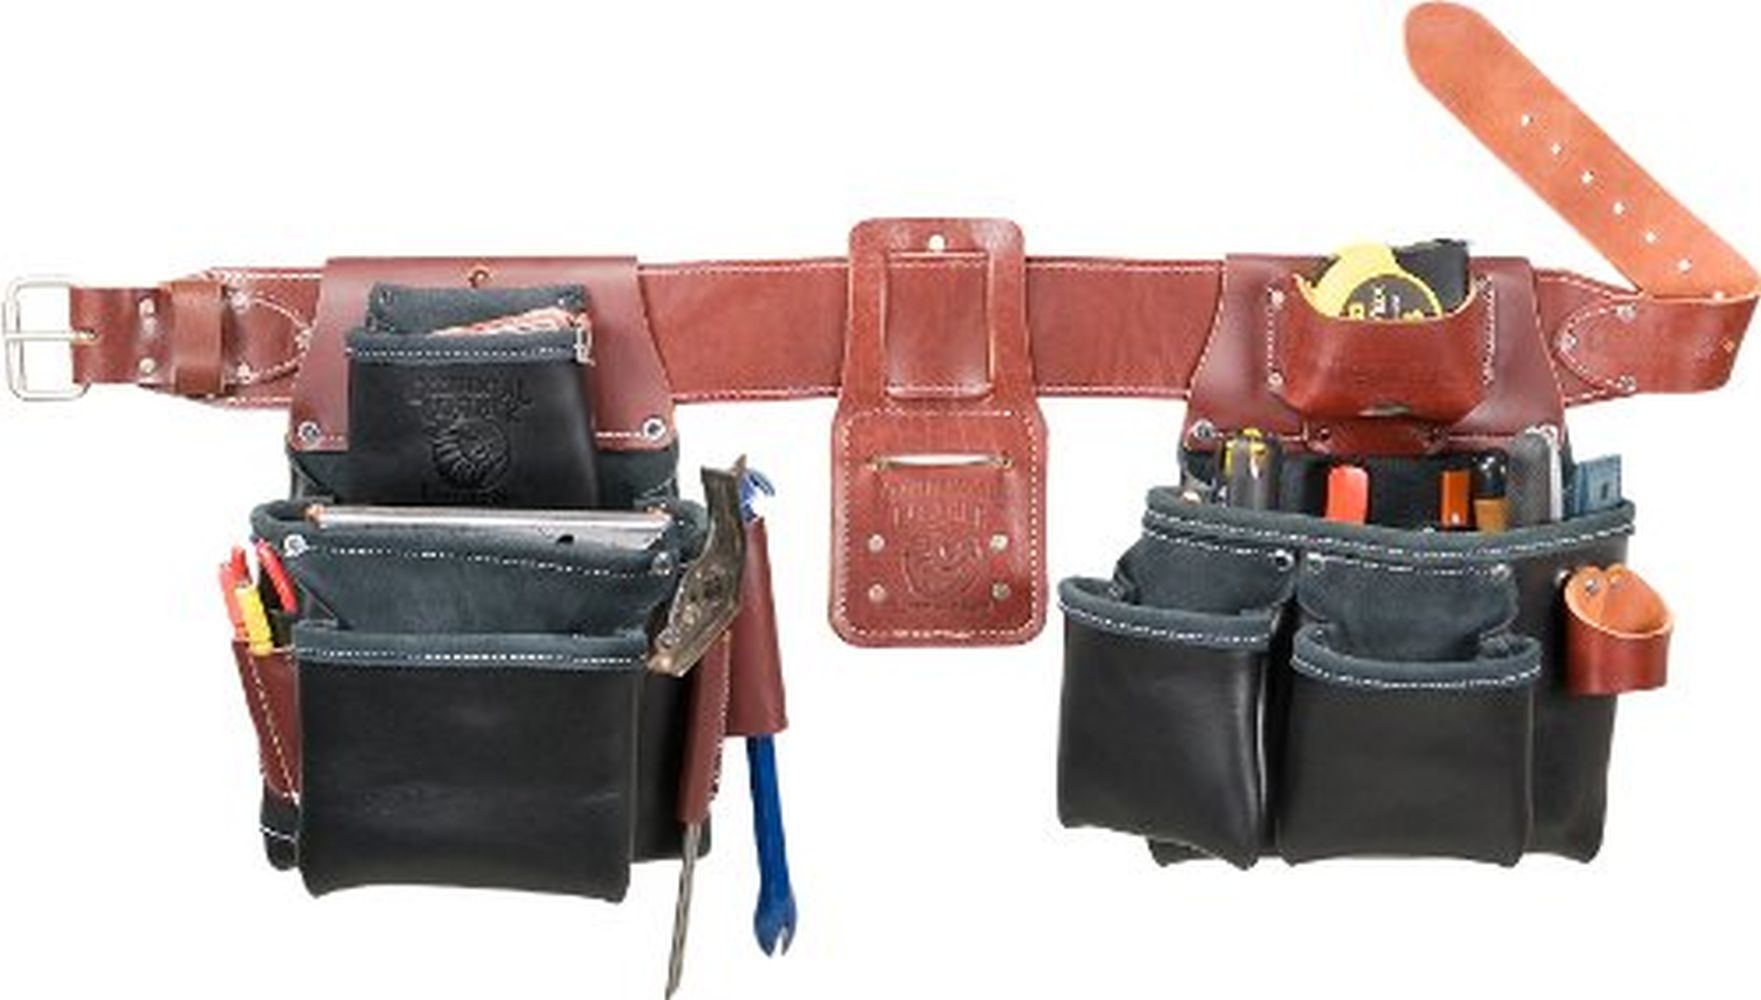 Occidental Leather 5080DBLH M Pro Framer Tool Belt Set with Double Outer Bags, Left Hand, Medium - 1